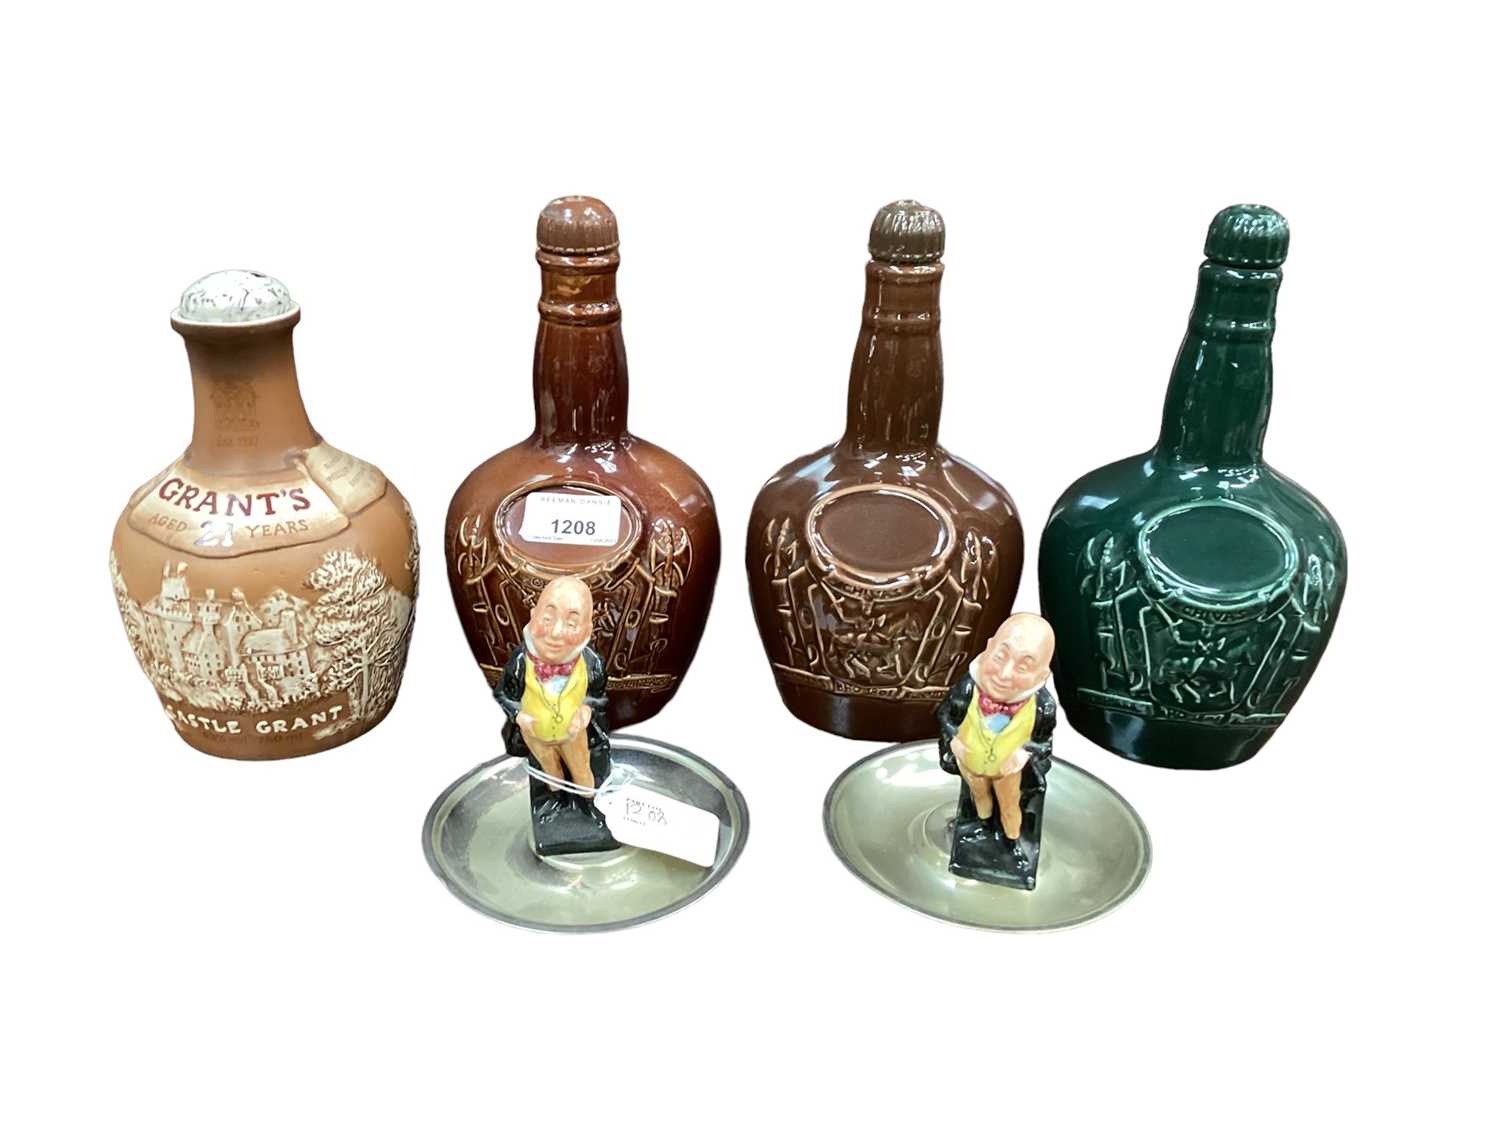 Lot 43 - Two Royal Doulton Kingsware whisky flagons, together with Spode and another Doulton whisky flagon, and a pair of Doulton figural ashtrays